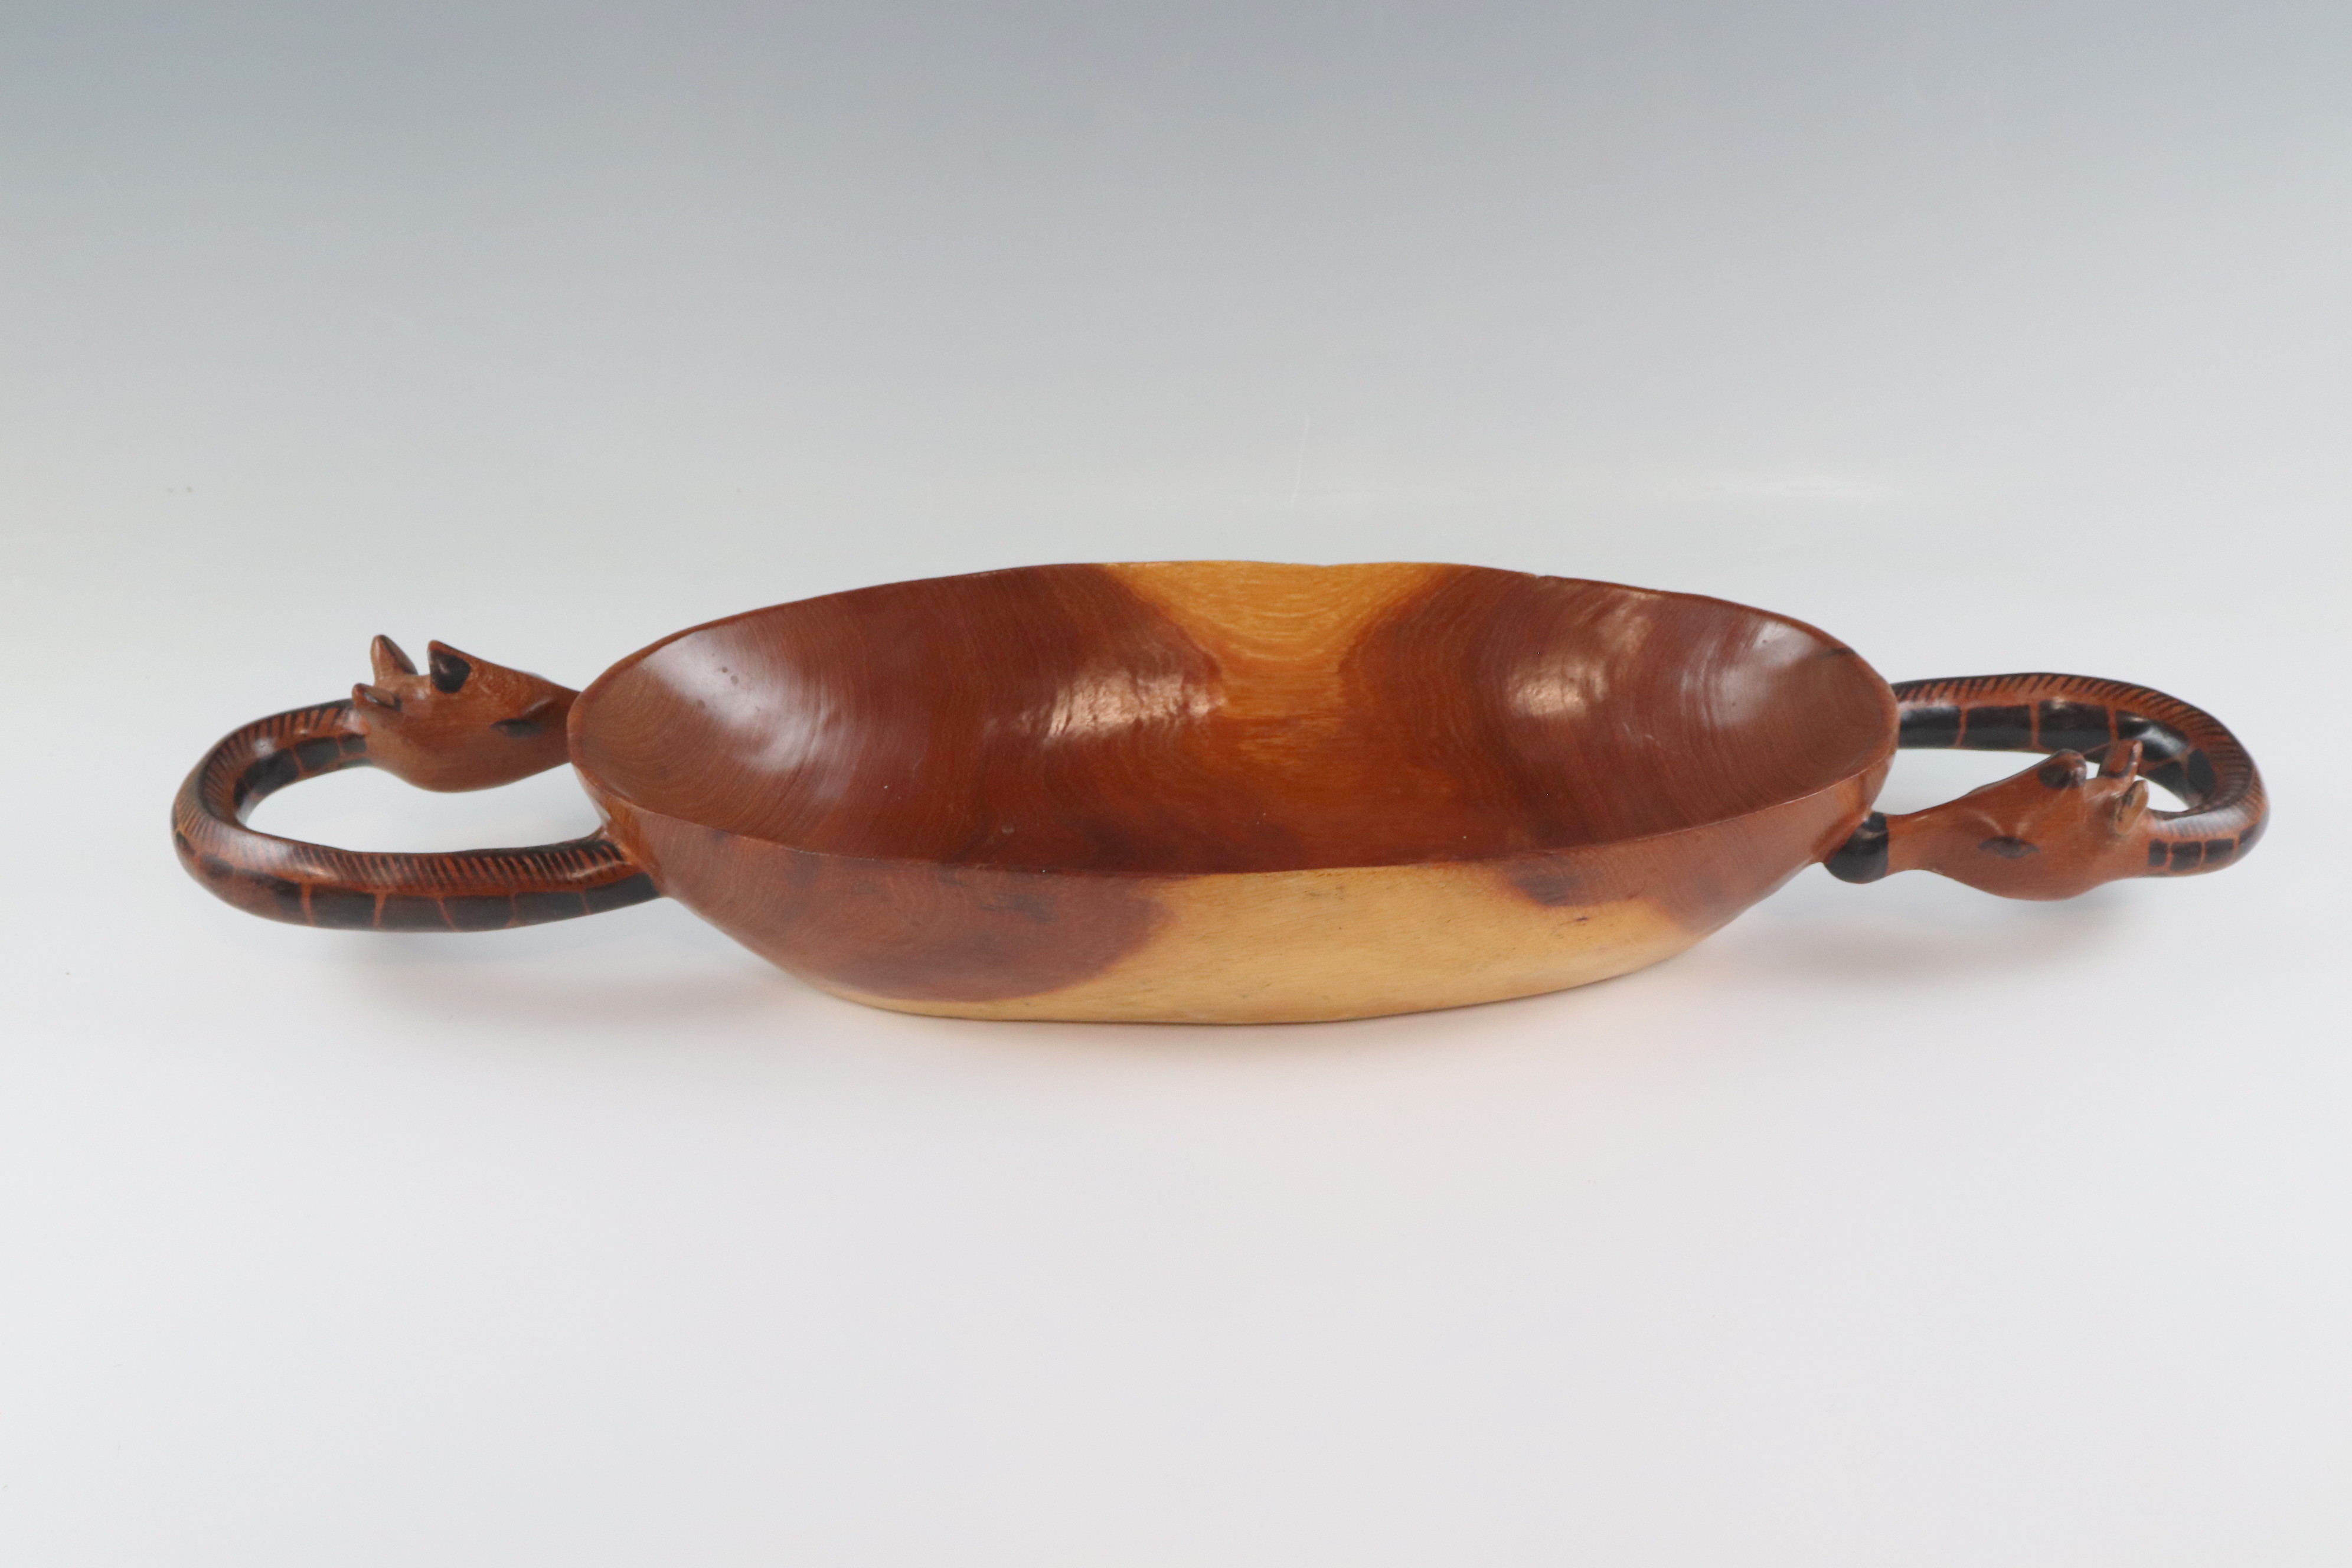 A large African carved and painted wooden bowl, its handles modelled as giraffes heads, 60 cm